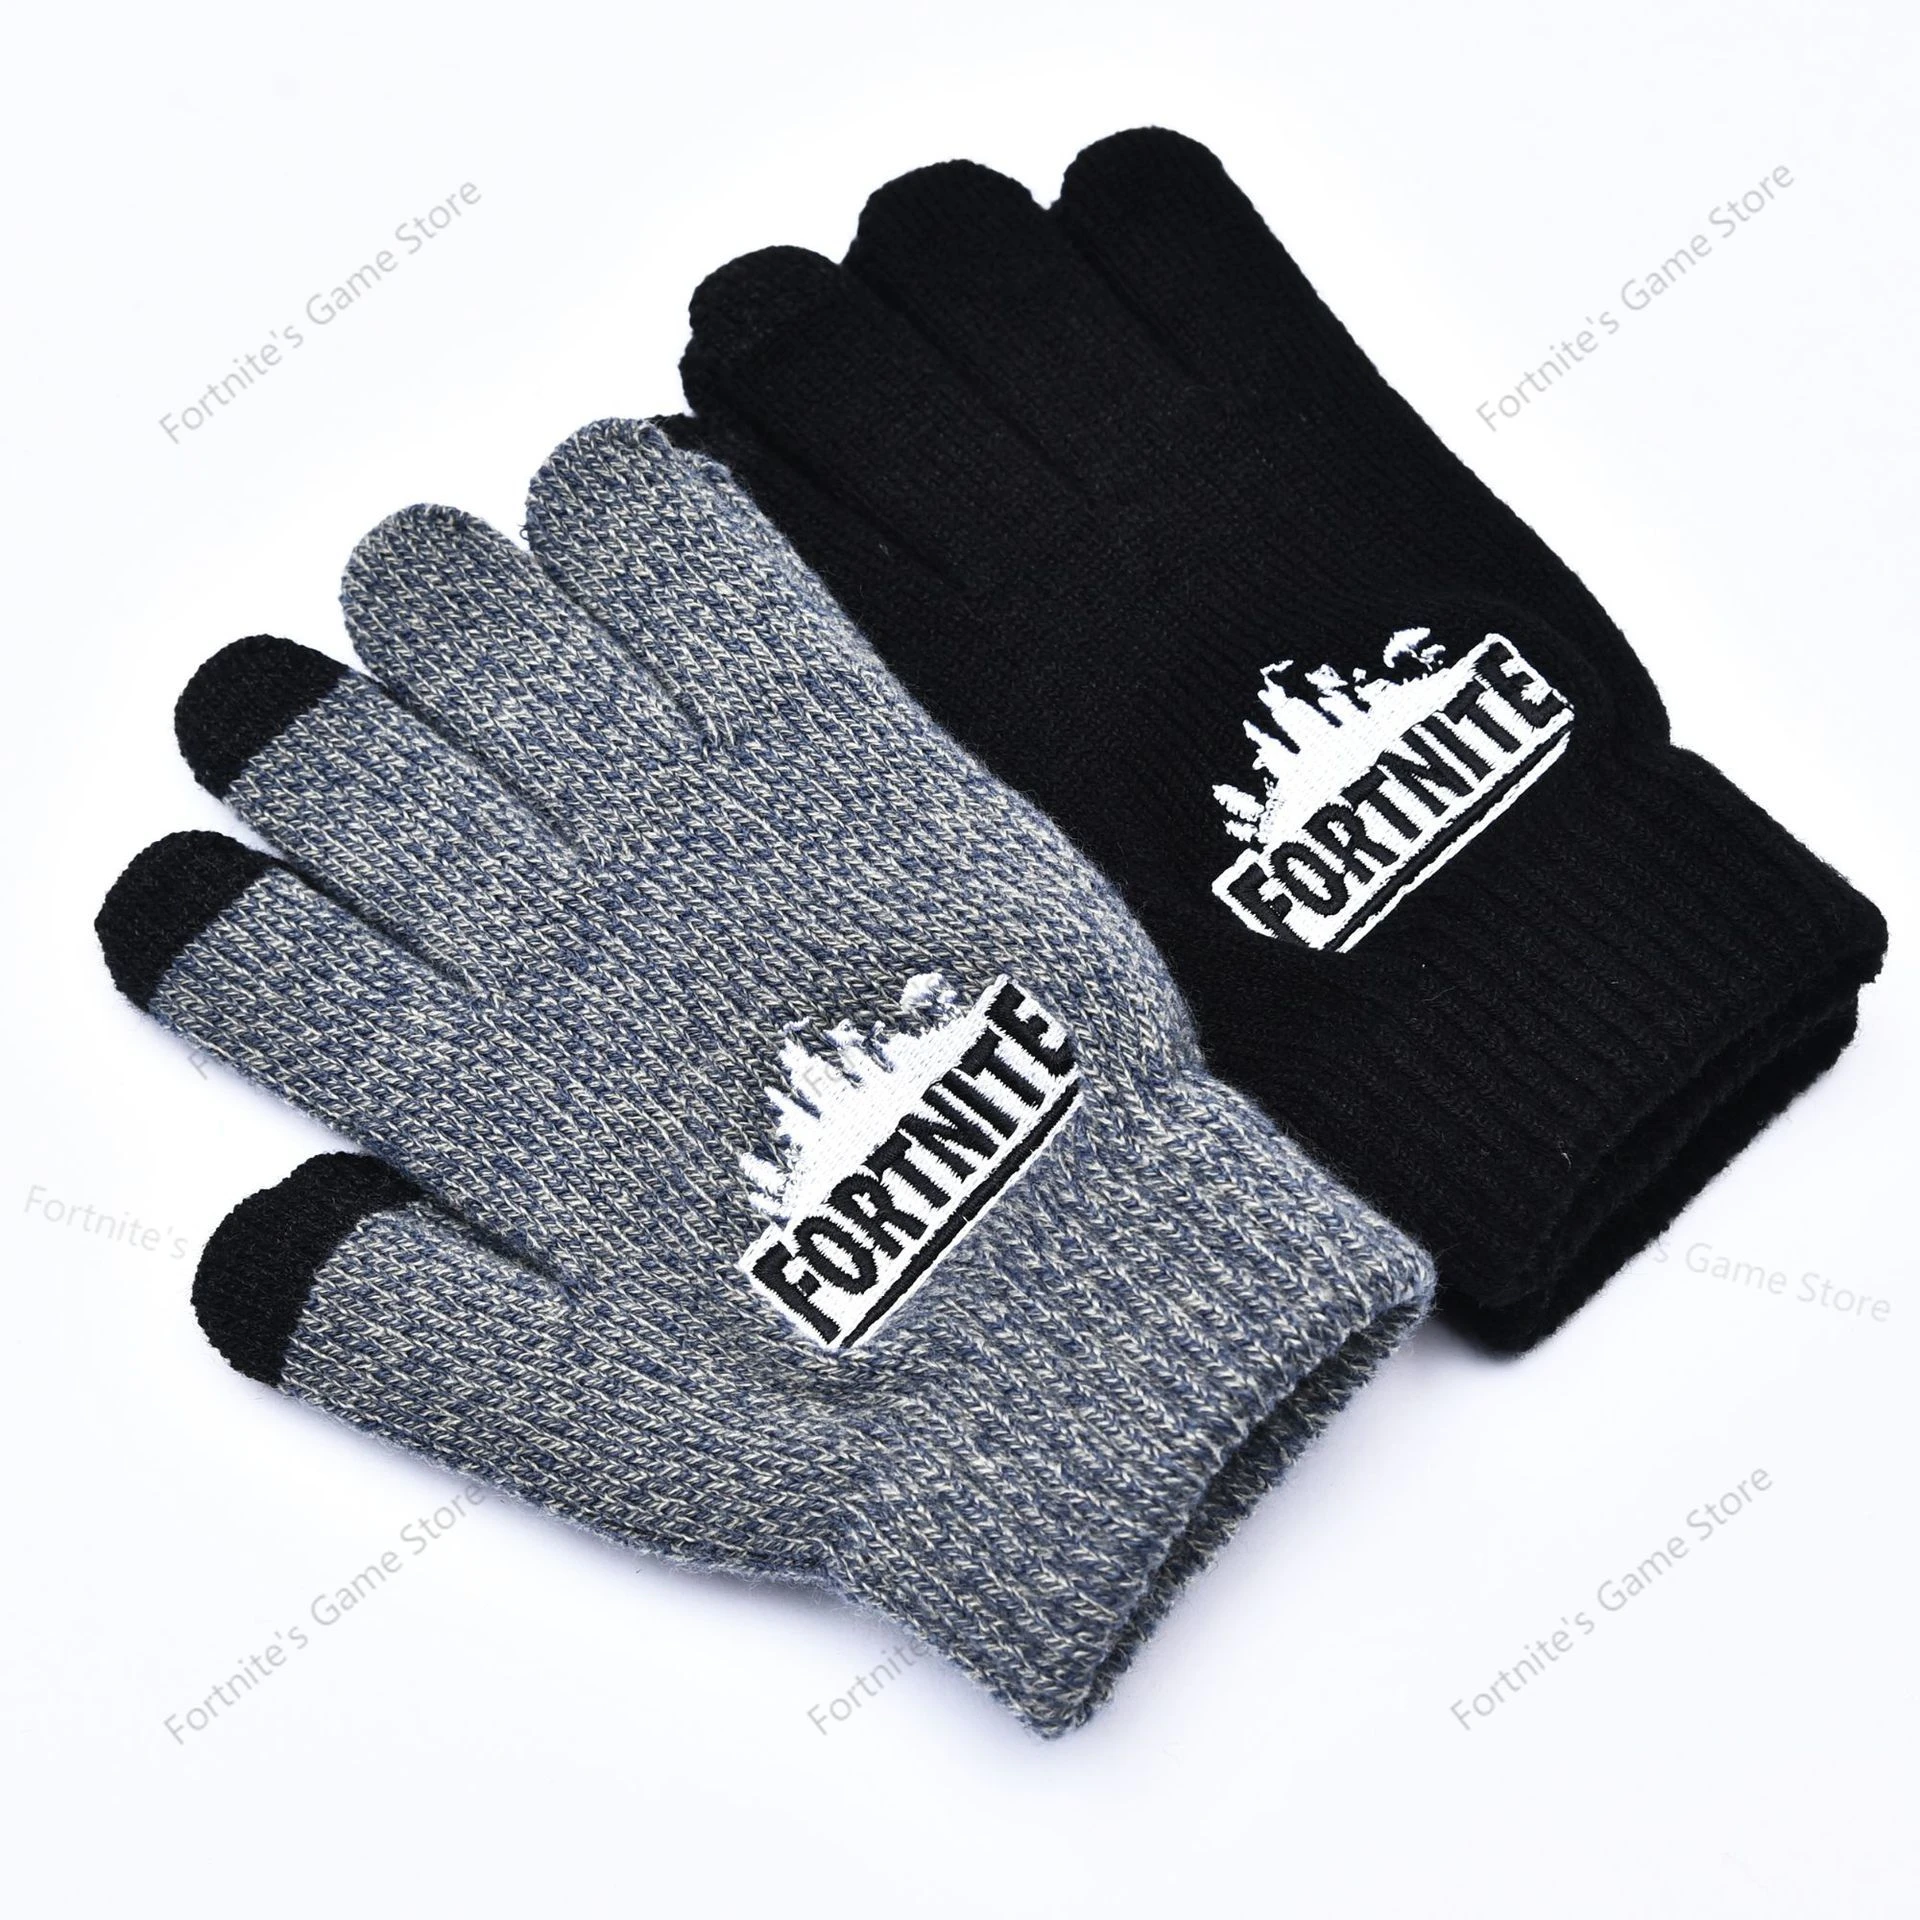 Fortnite Gloves Men Warm Winter Thick Touch Screen Knitted Gloves Unisex Children S Christmas Gift For Kid Birthday Action Figures Aliexpress - warm winter scarf roblox